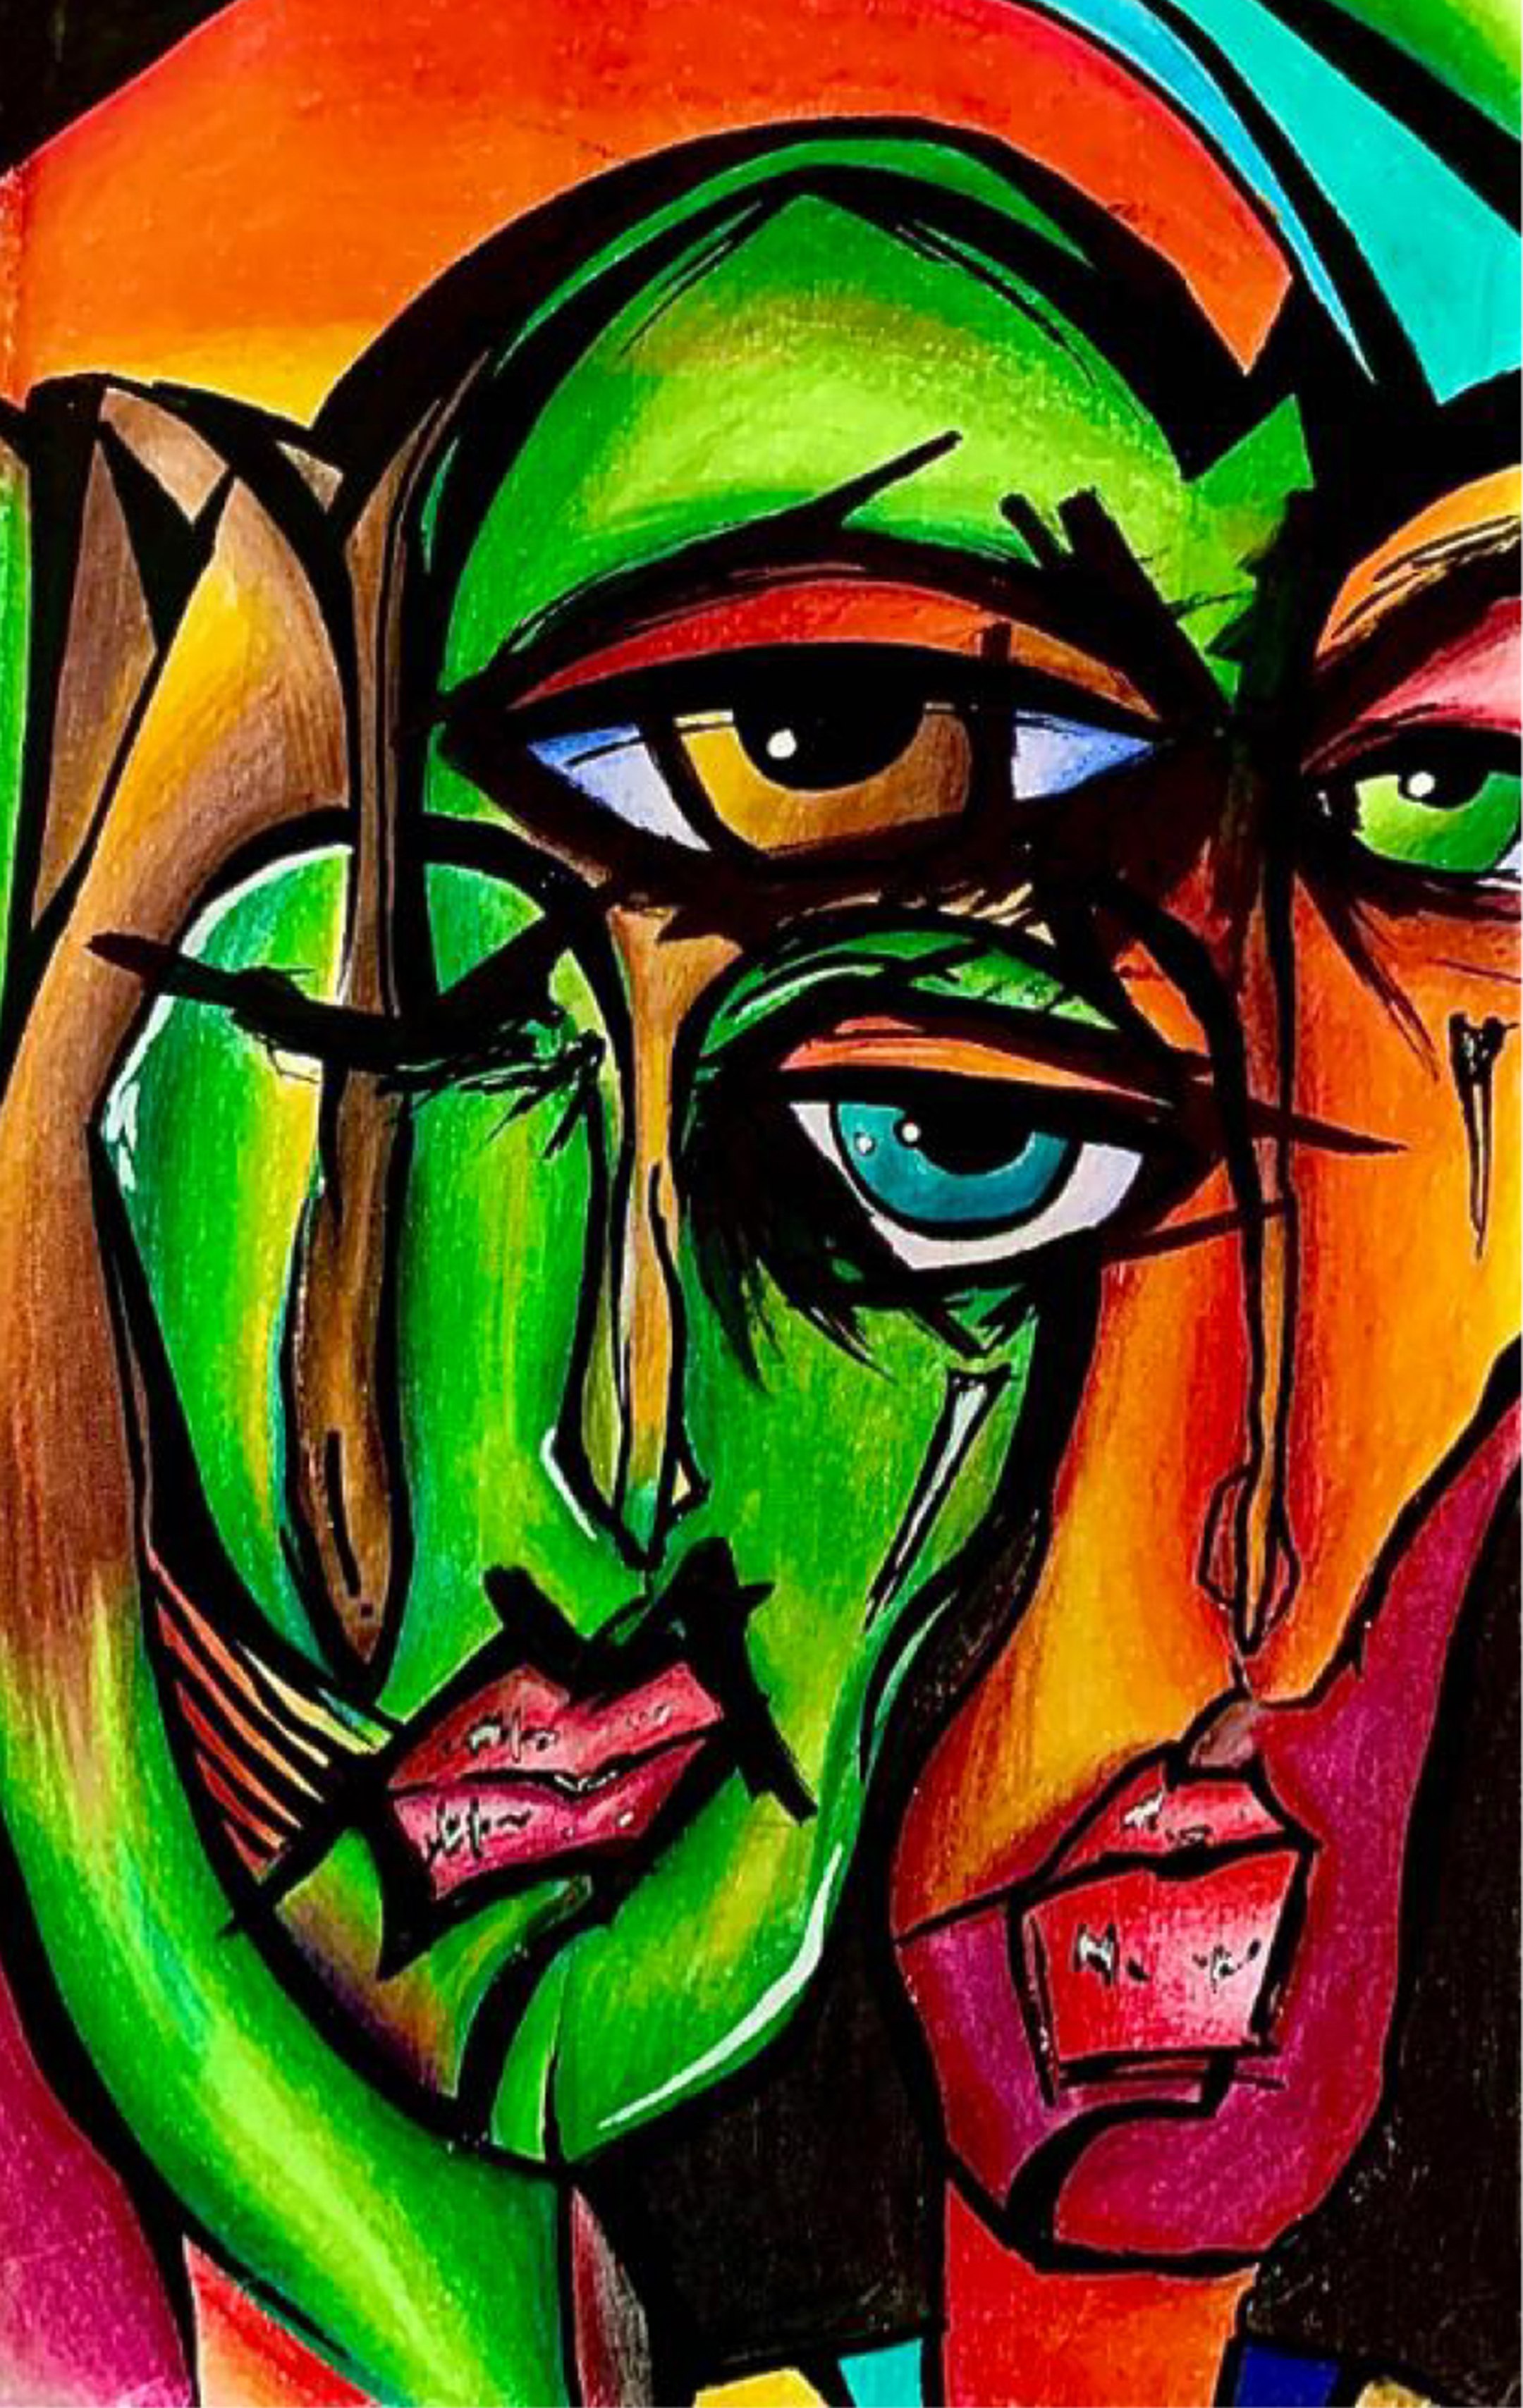 Abstract painting of two faces merging in neon green and orange